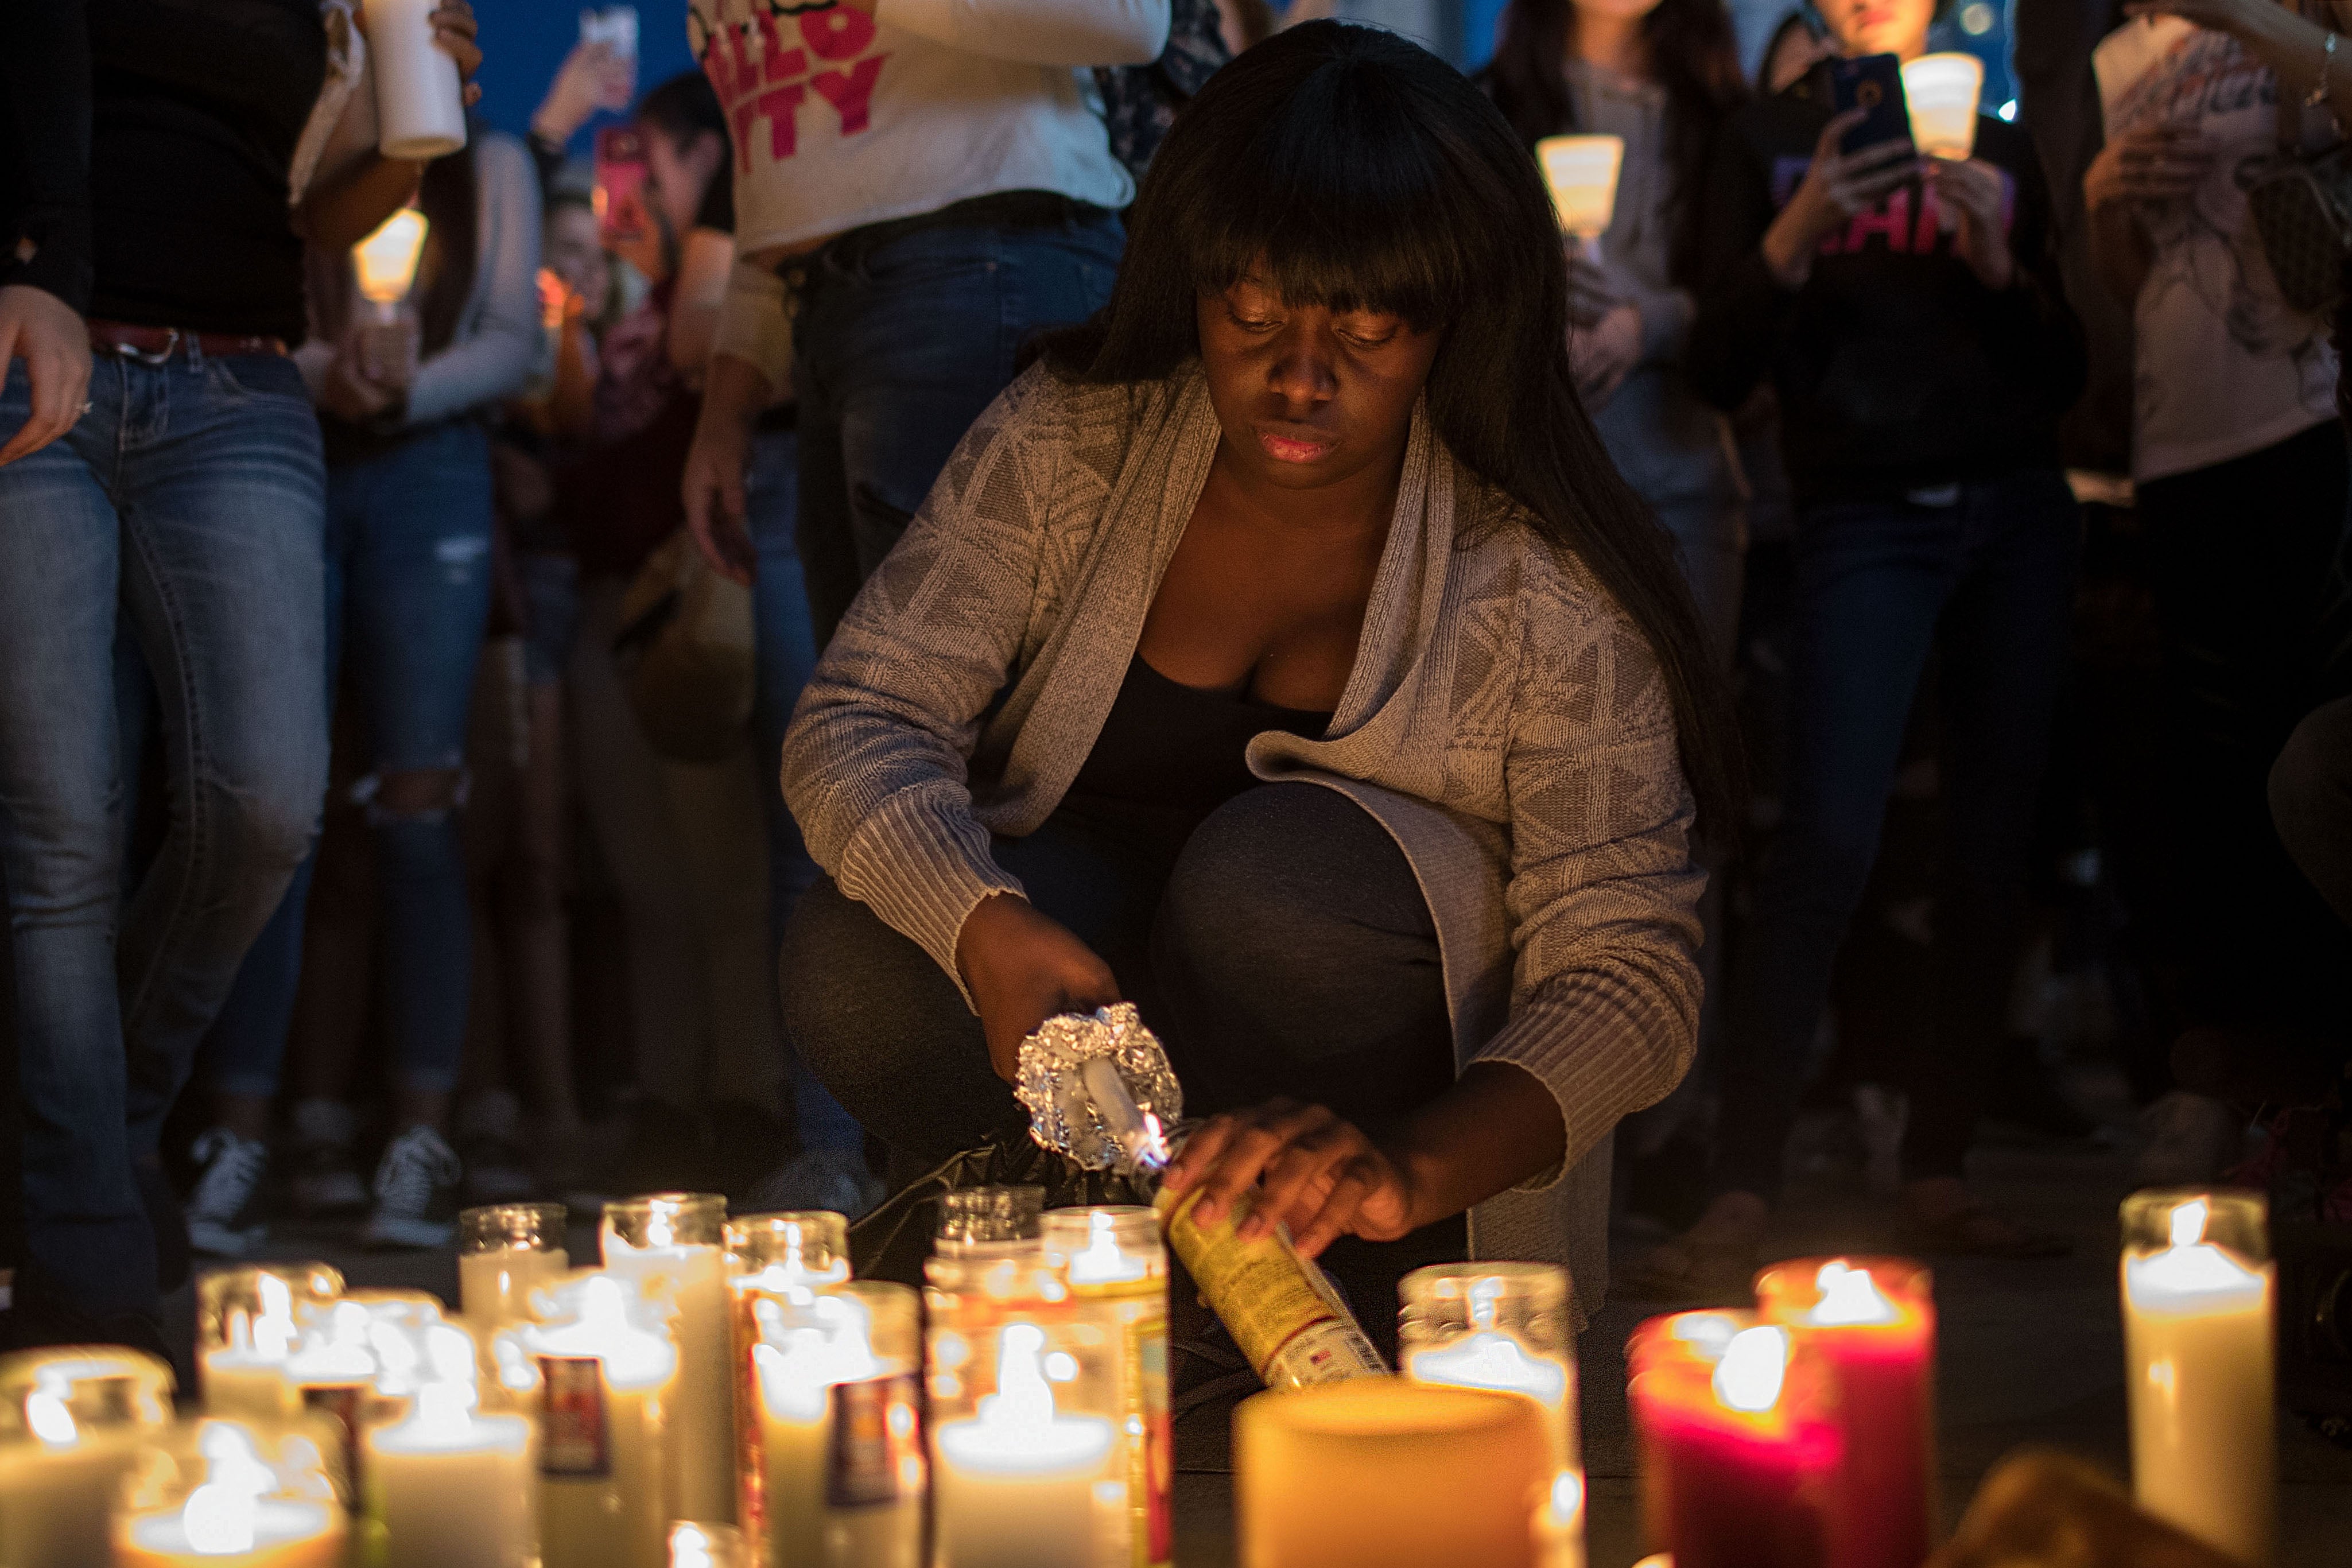 Here Are The 5 Deadliest Mass Shootings In Modern U.S History
